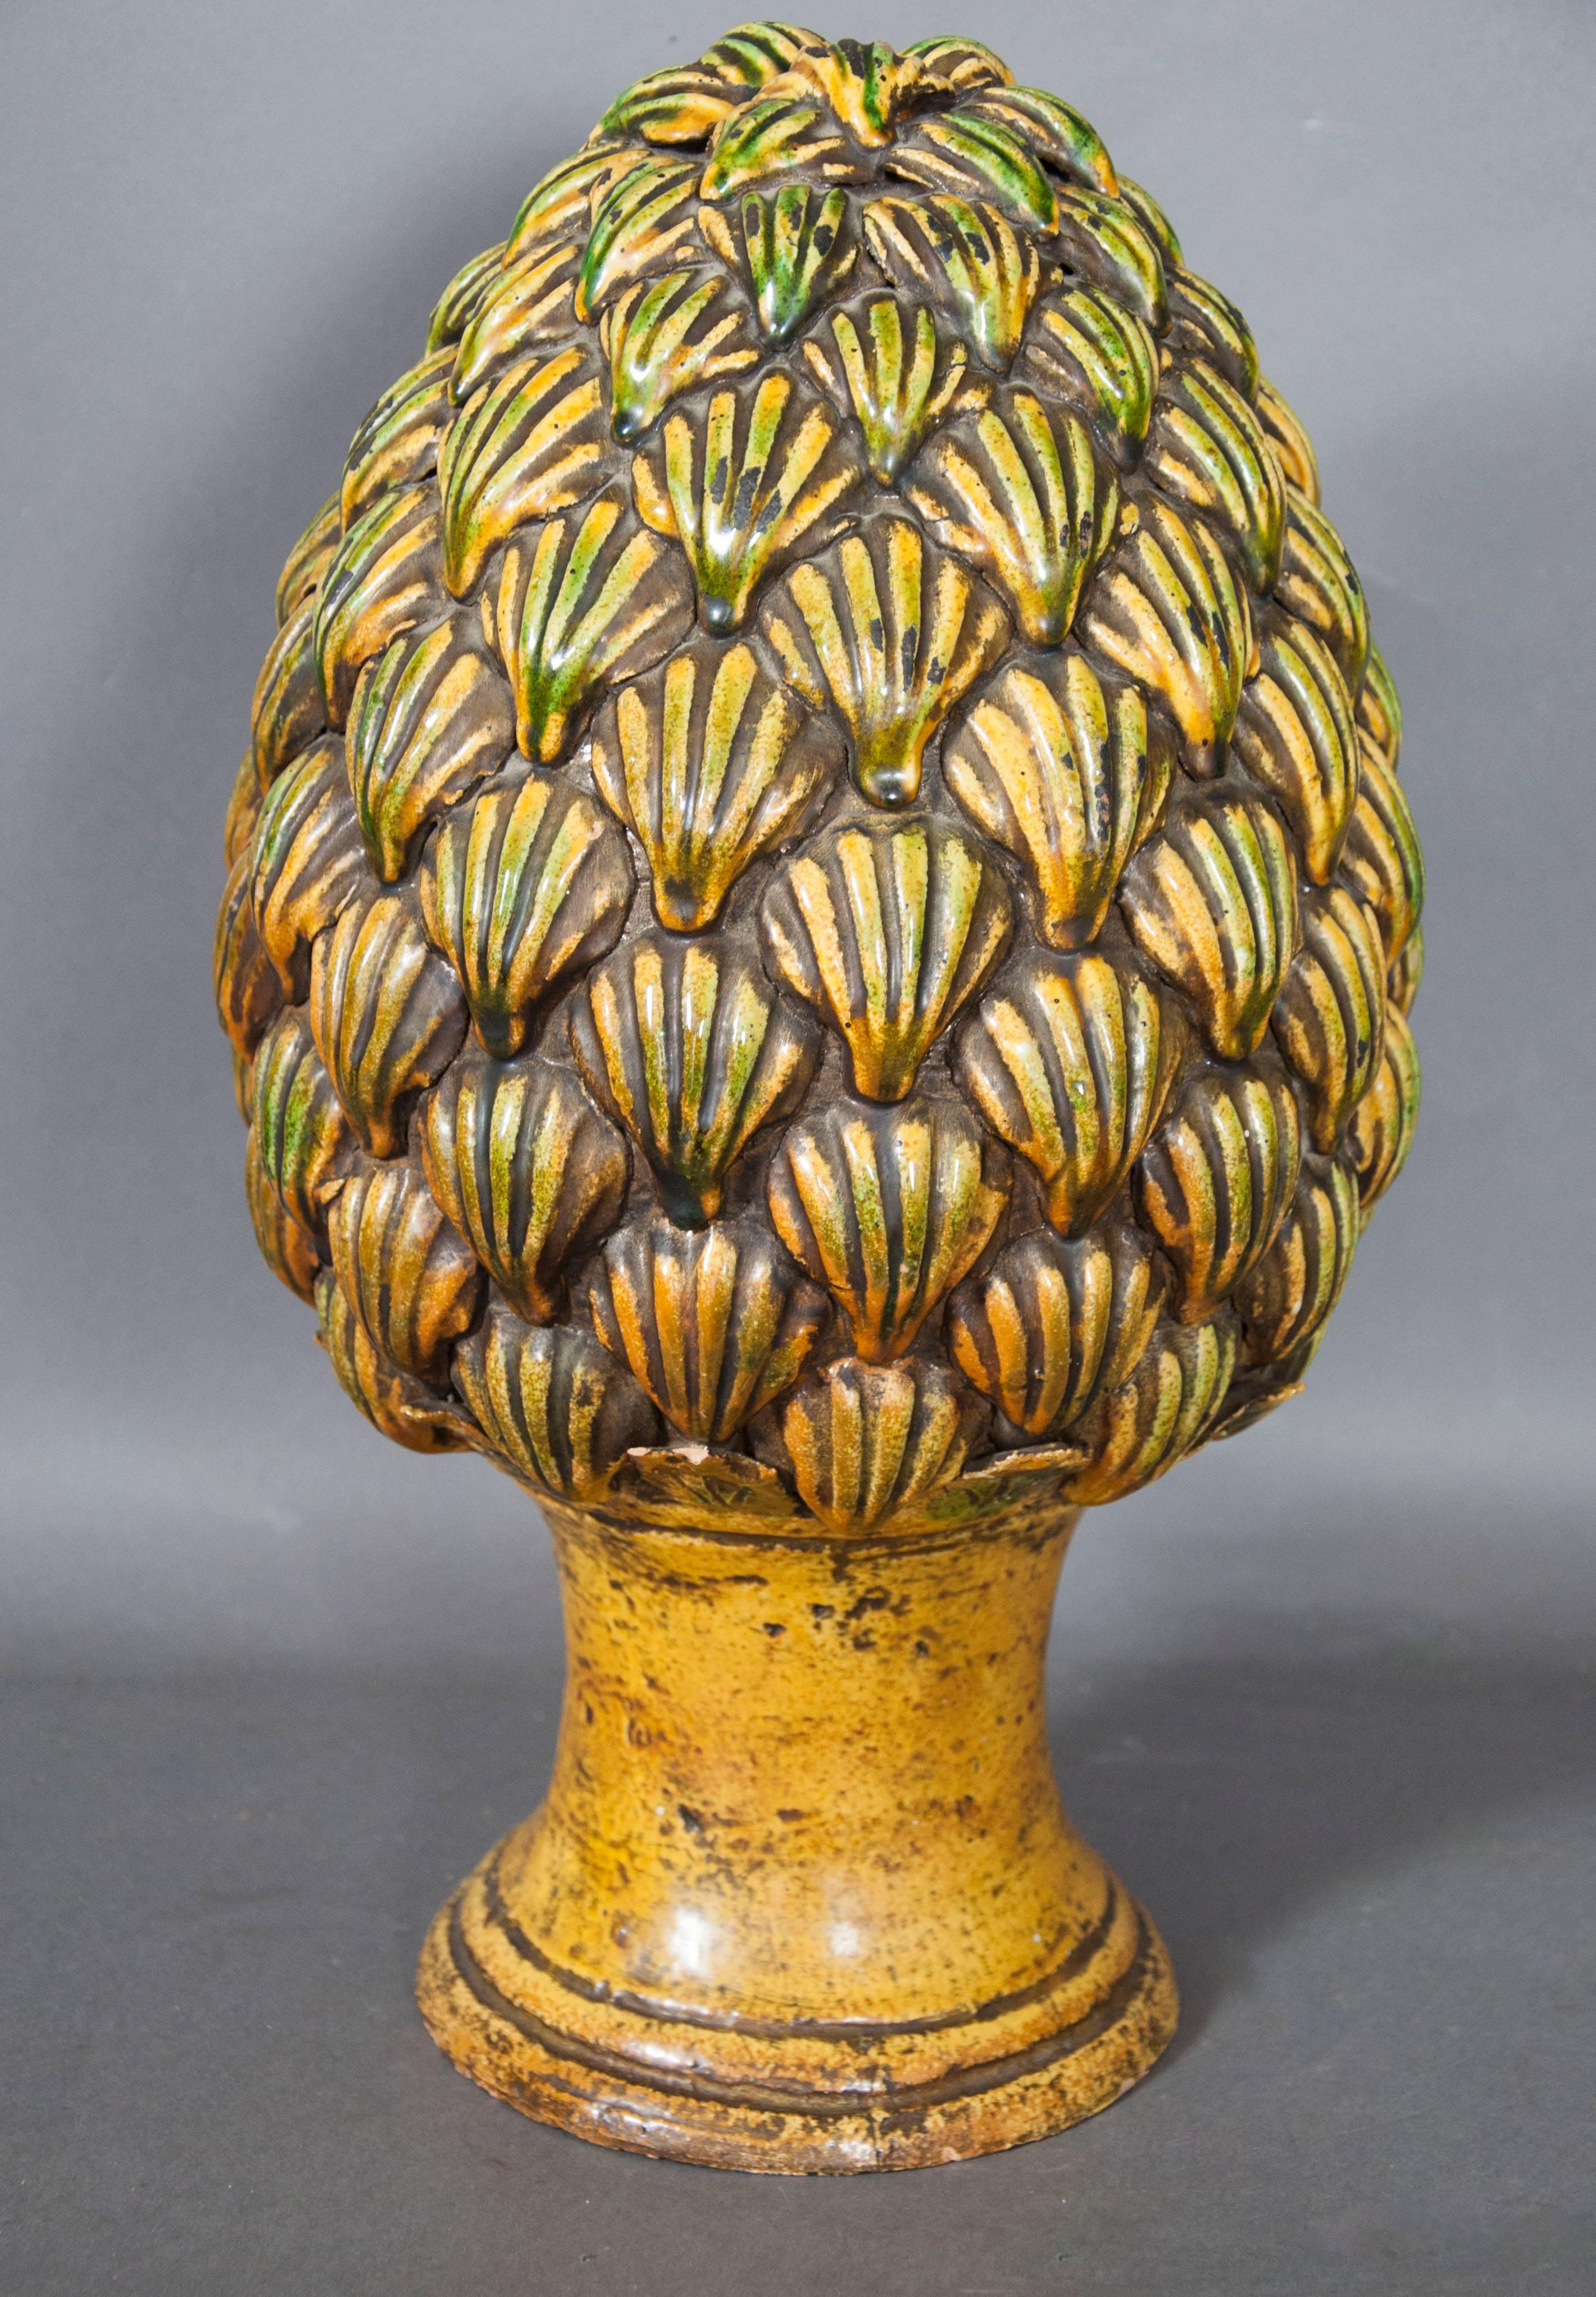 Decorated in yellows and greens, scallop shell shaped decoration, circular base.